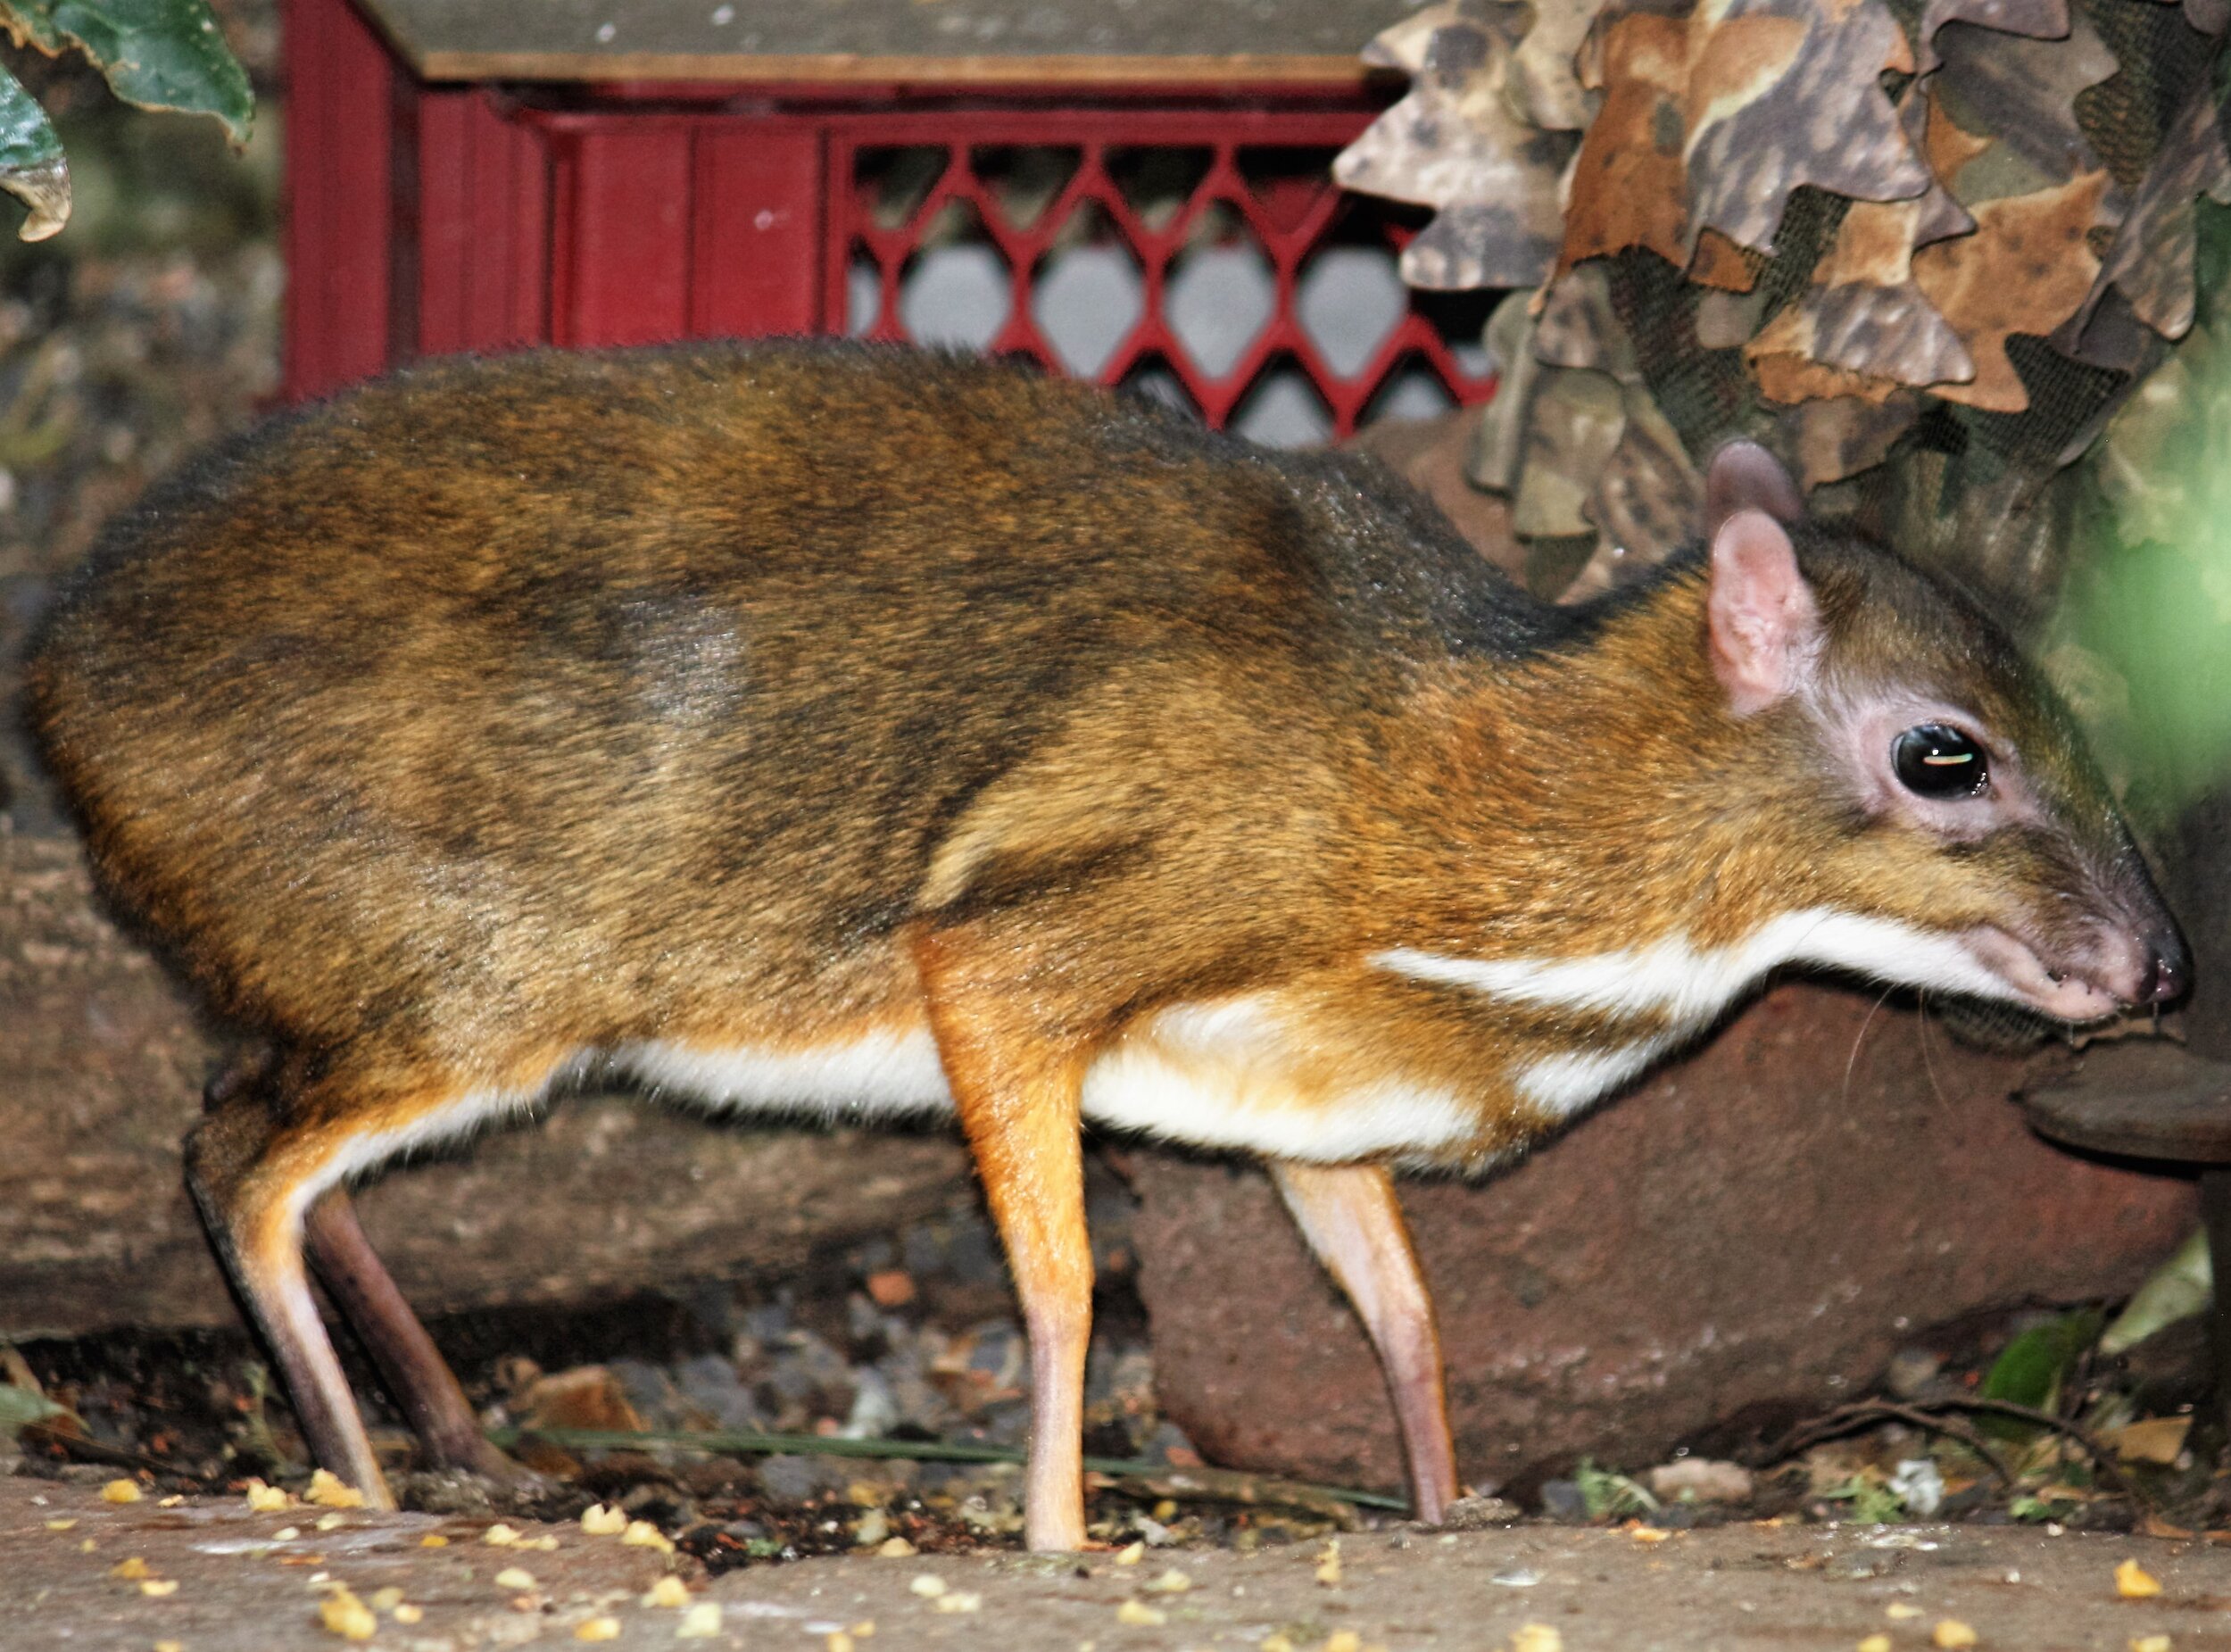 PICTURED: The lesser chevrotain, cousin to the silver-back, at the Hellabrunn Zoo. Photo credit J. Patrick Fischer. CC 4.0